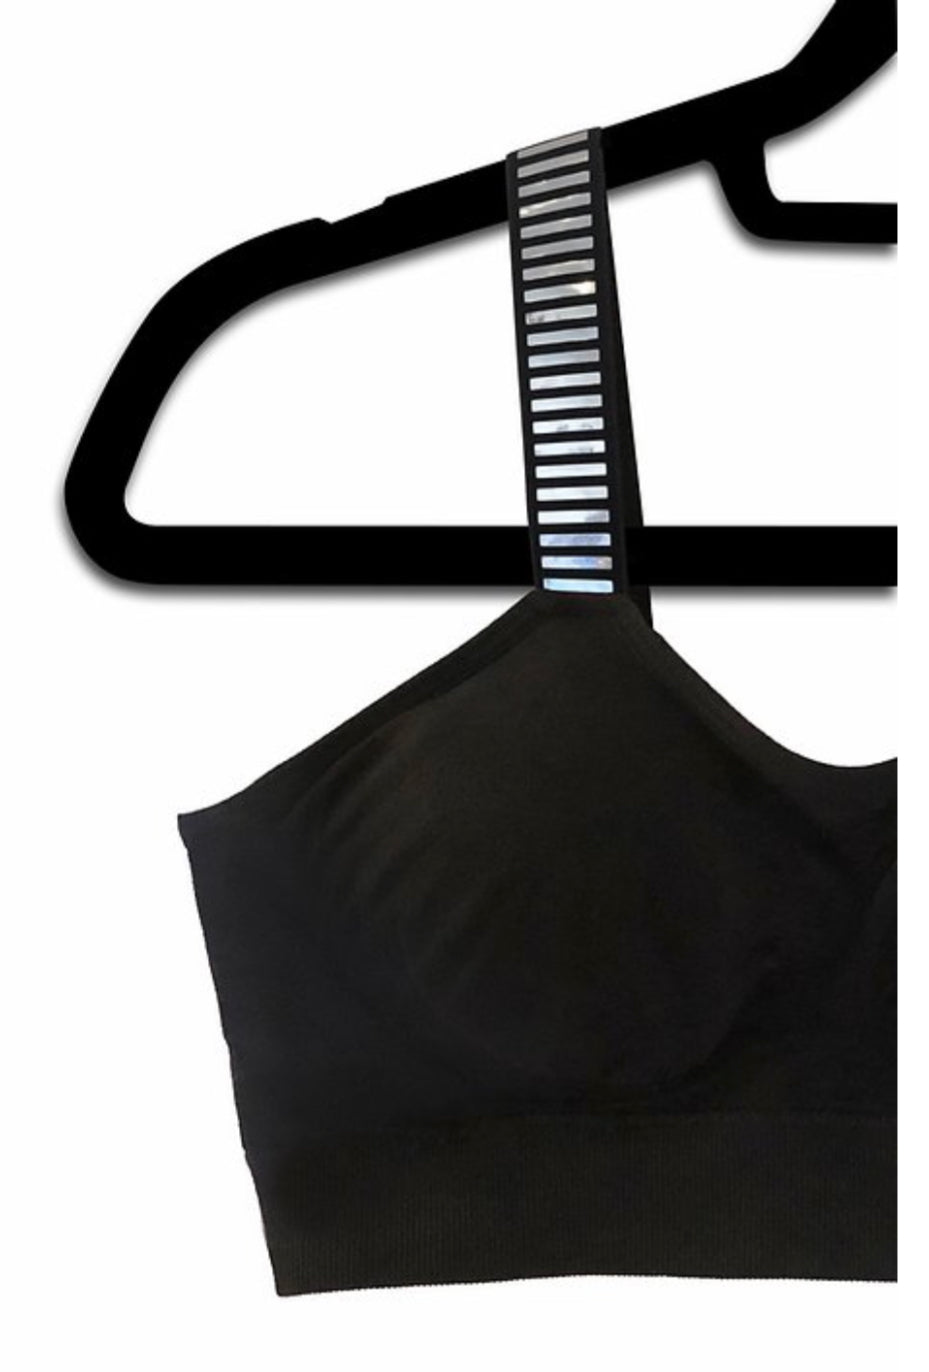 TOP SELLER! Strap it bras with attached straps - black with silver rows - Lisa’s Northbrook